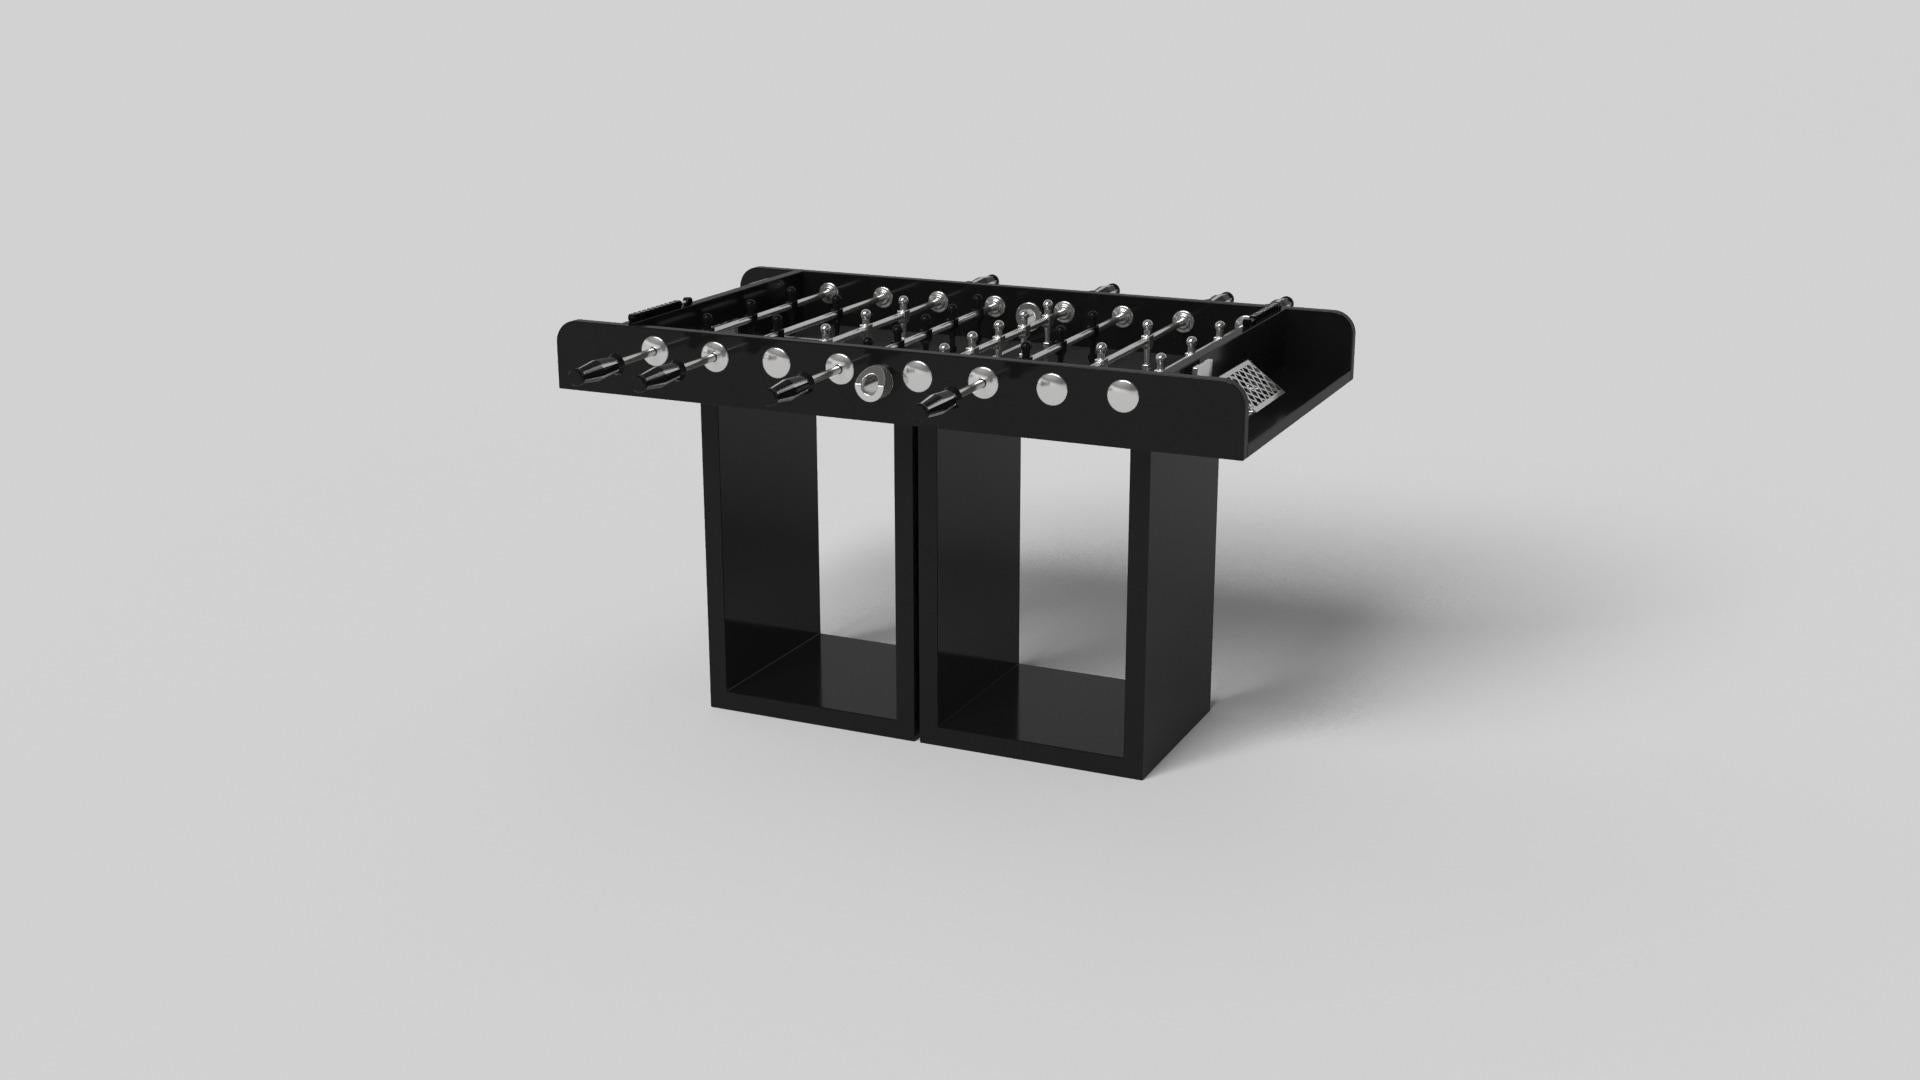 Supported by two rectangular open pedestals as the base, this handcrafted foosball table is modern and minimalistic with its combination of simple, geometric forms. Viewed from the front, the use of negative space is evident; viewed from the side,